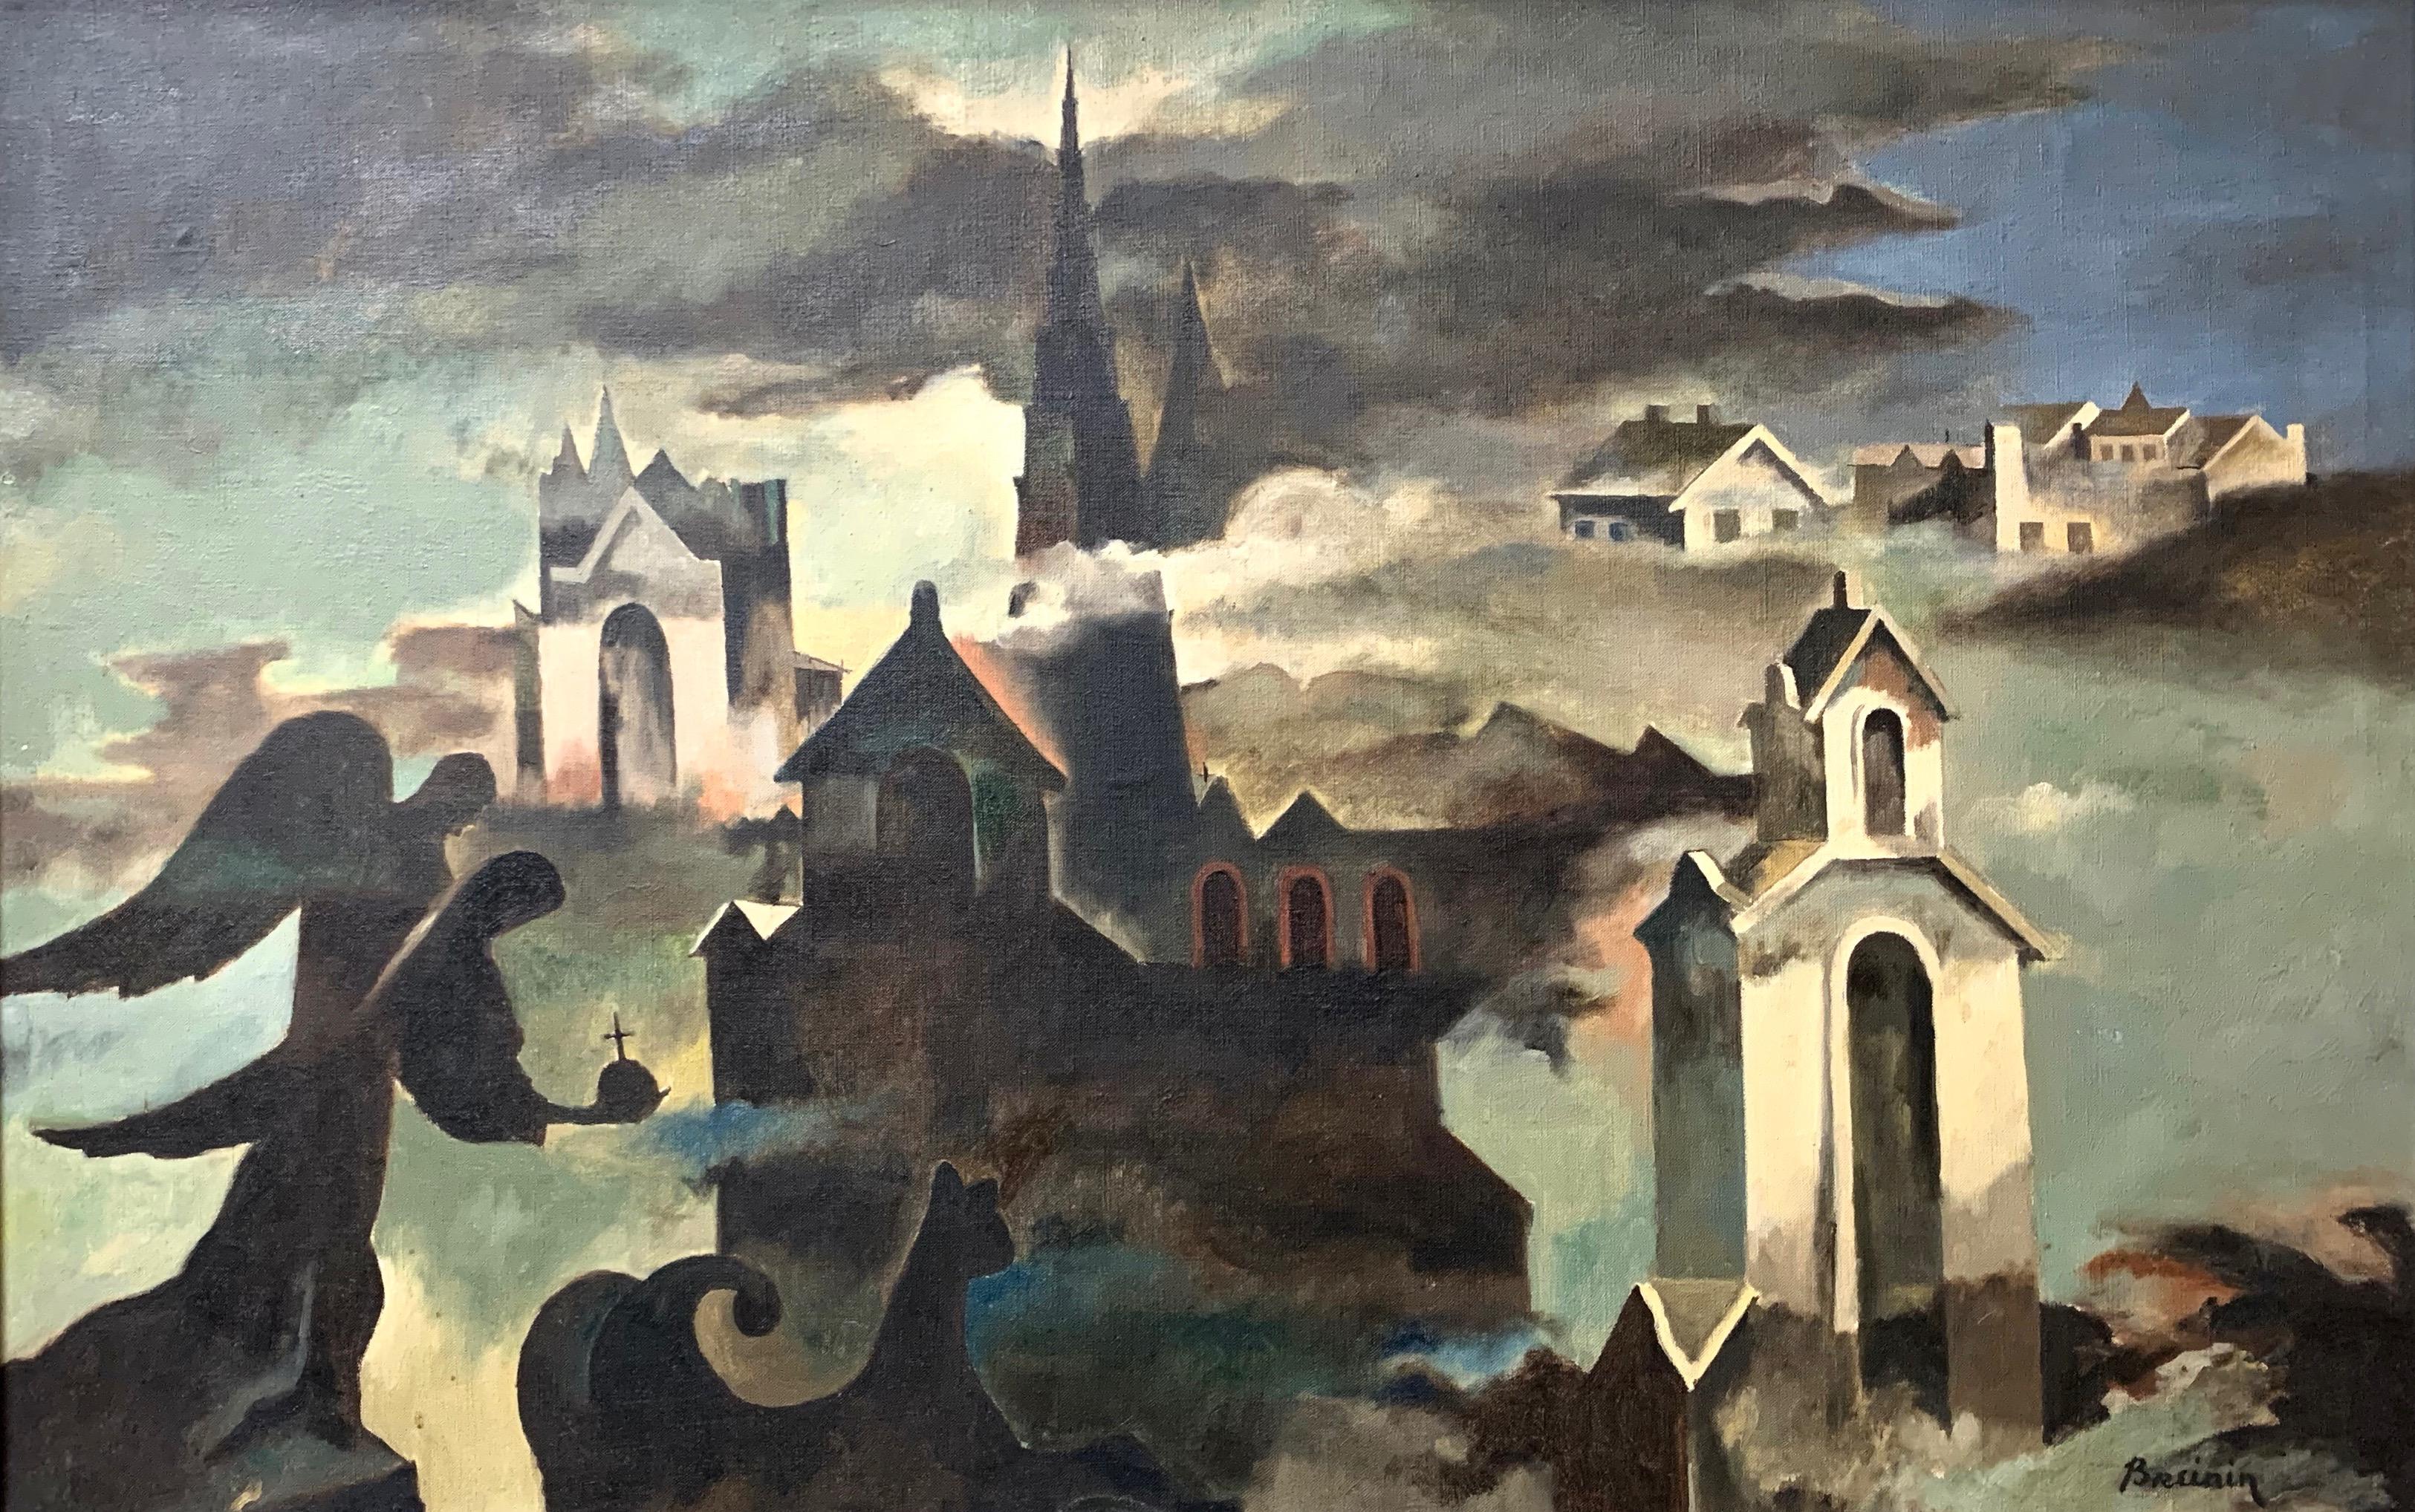 American expressionist oil on canvas painting titled 'In The Dark of the Hour', painted by Raymond Breinin (1910-2000) in 1942. The piece is inspired by Claude Debussy's 'La Cathedrale Engloutie' (the Engulfed Cathedral) and was created by Breinin